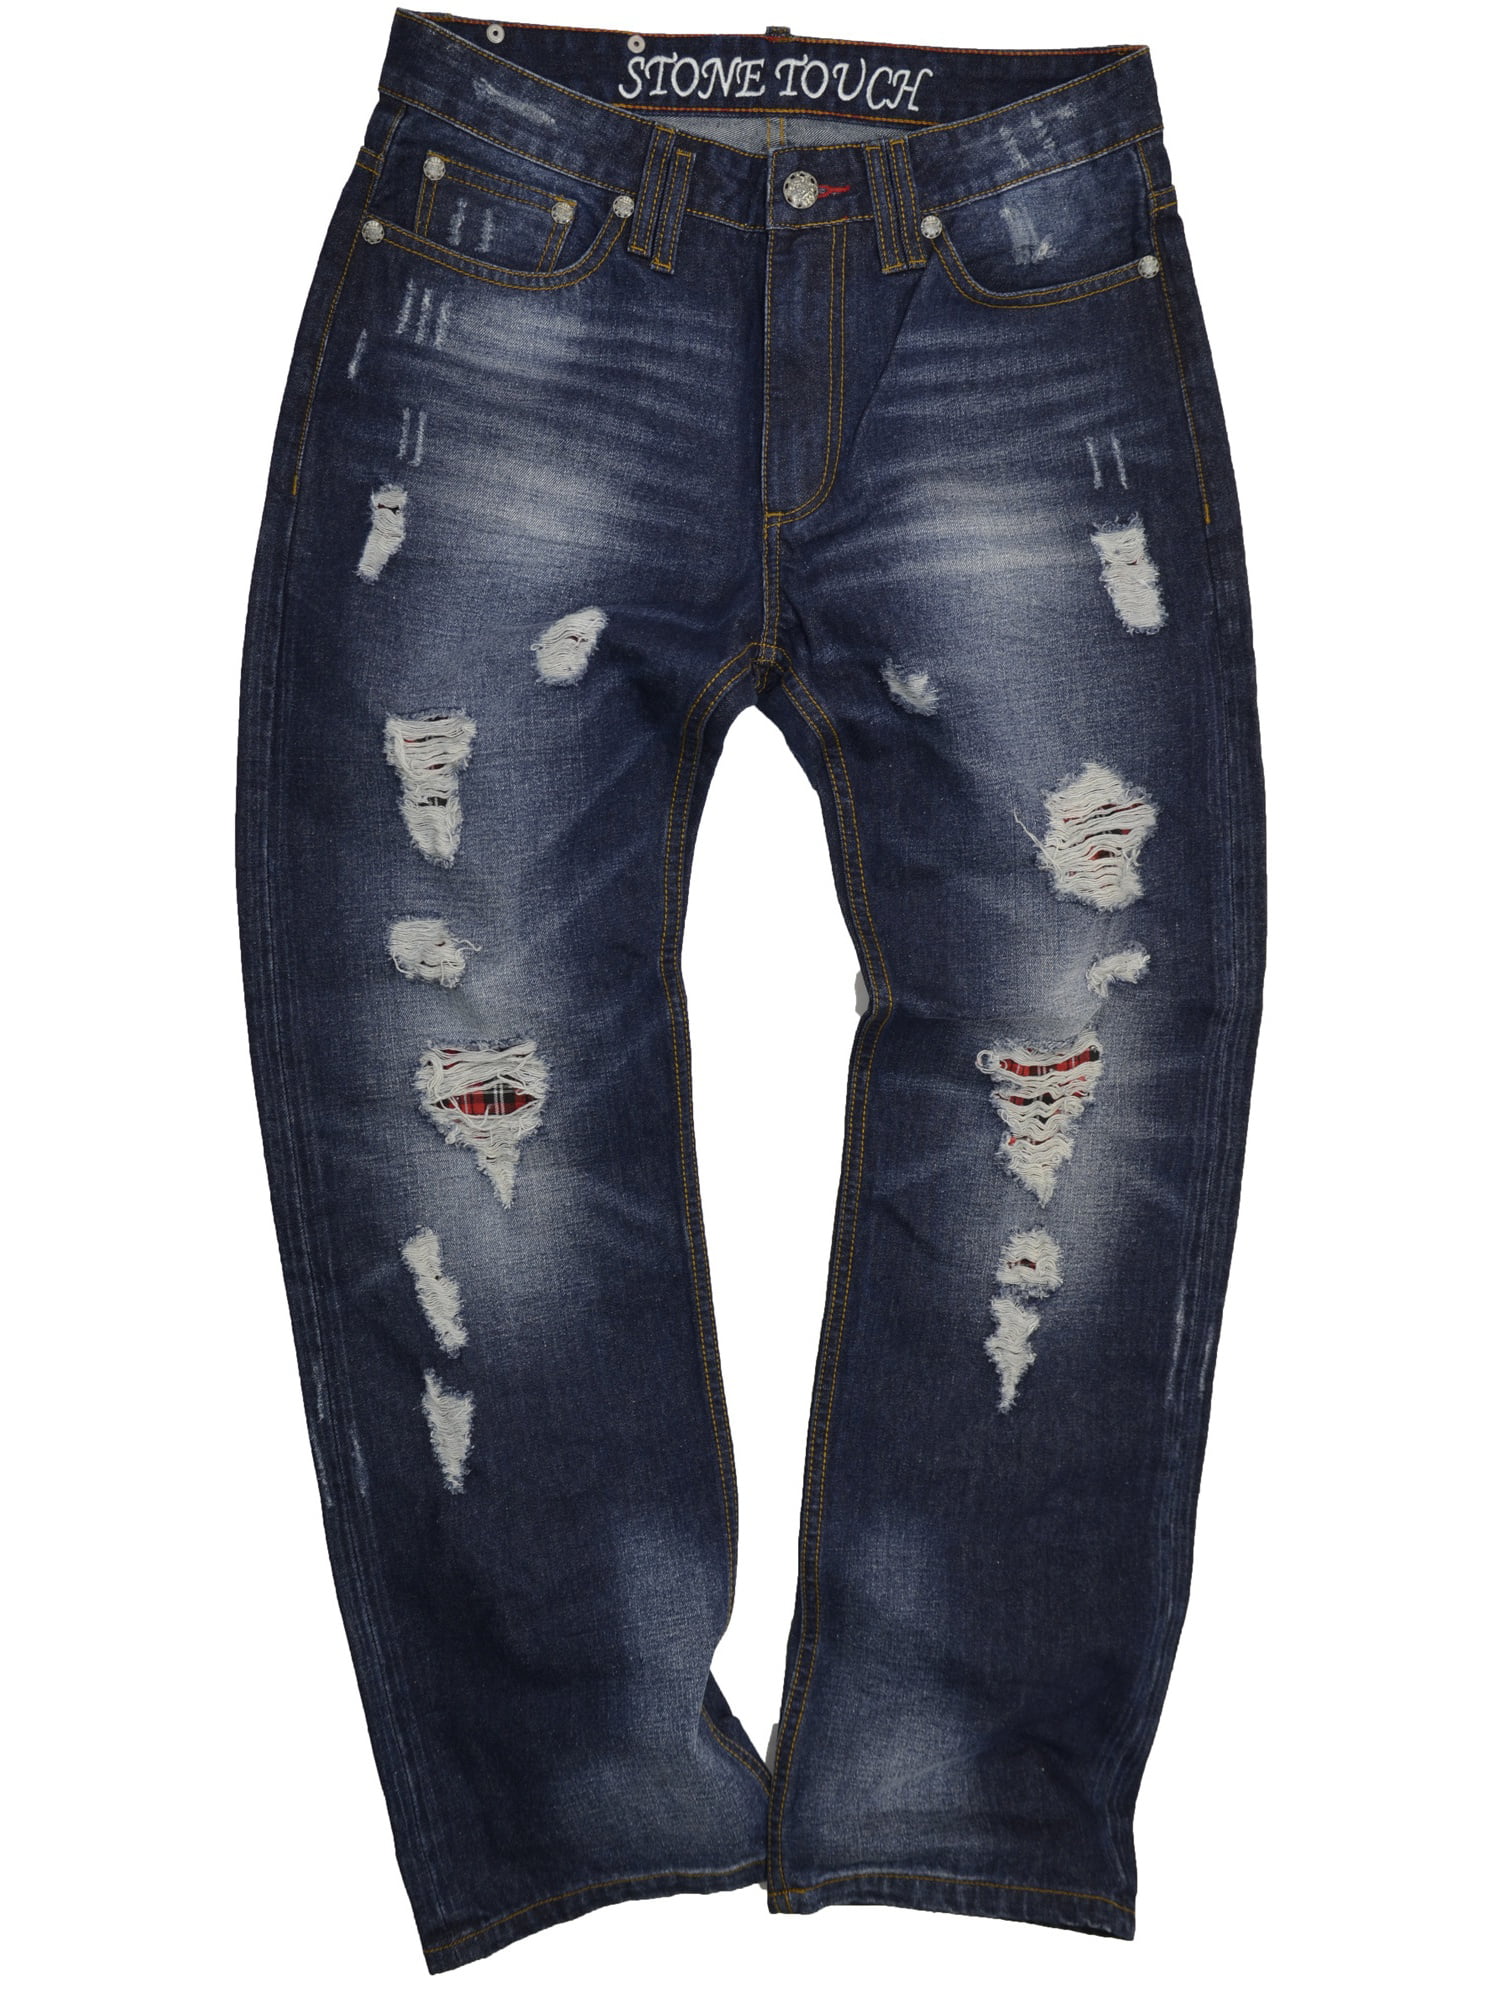 StoneTouch Men's Relaxed Jeans N2288 - Walmart.com